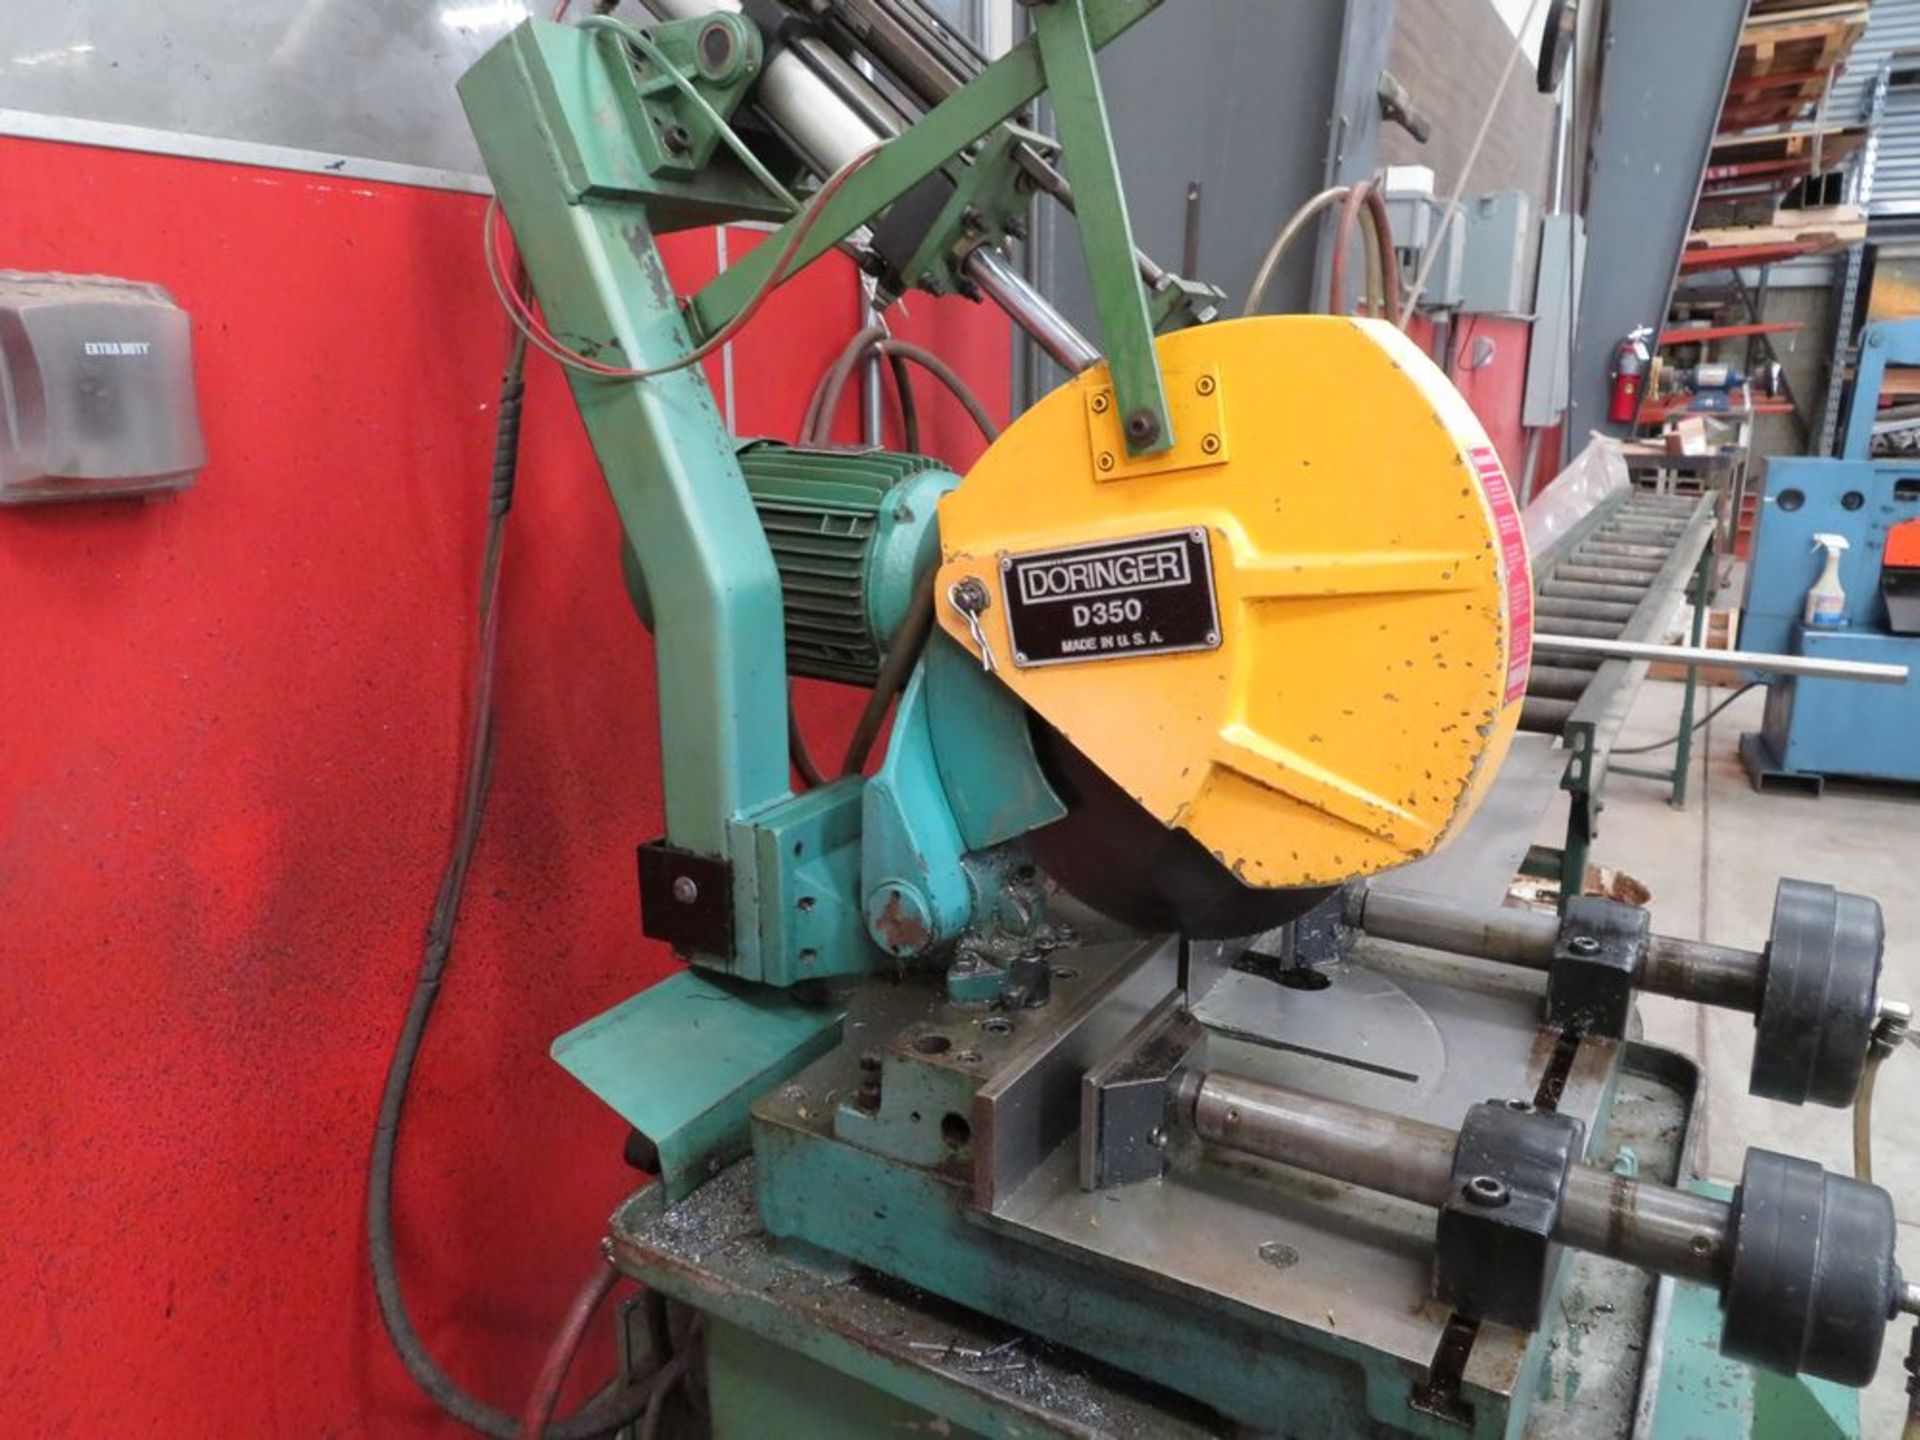 Doringer mod. D350, 12" Cold Saw w/ Twin Clamping, Infeed & Outfeed - Image 4 of 5